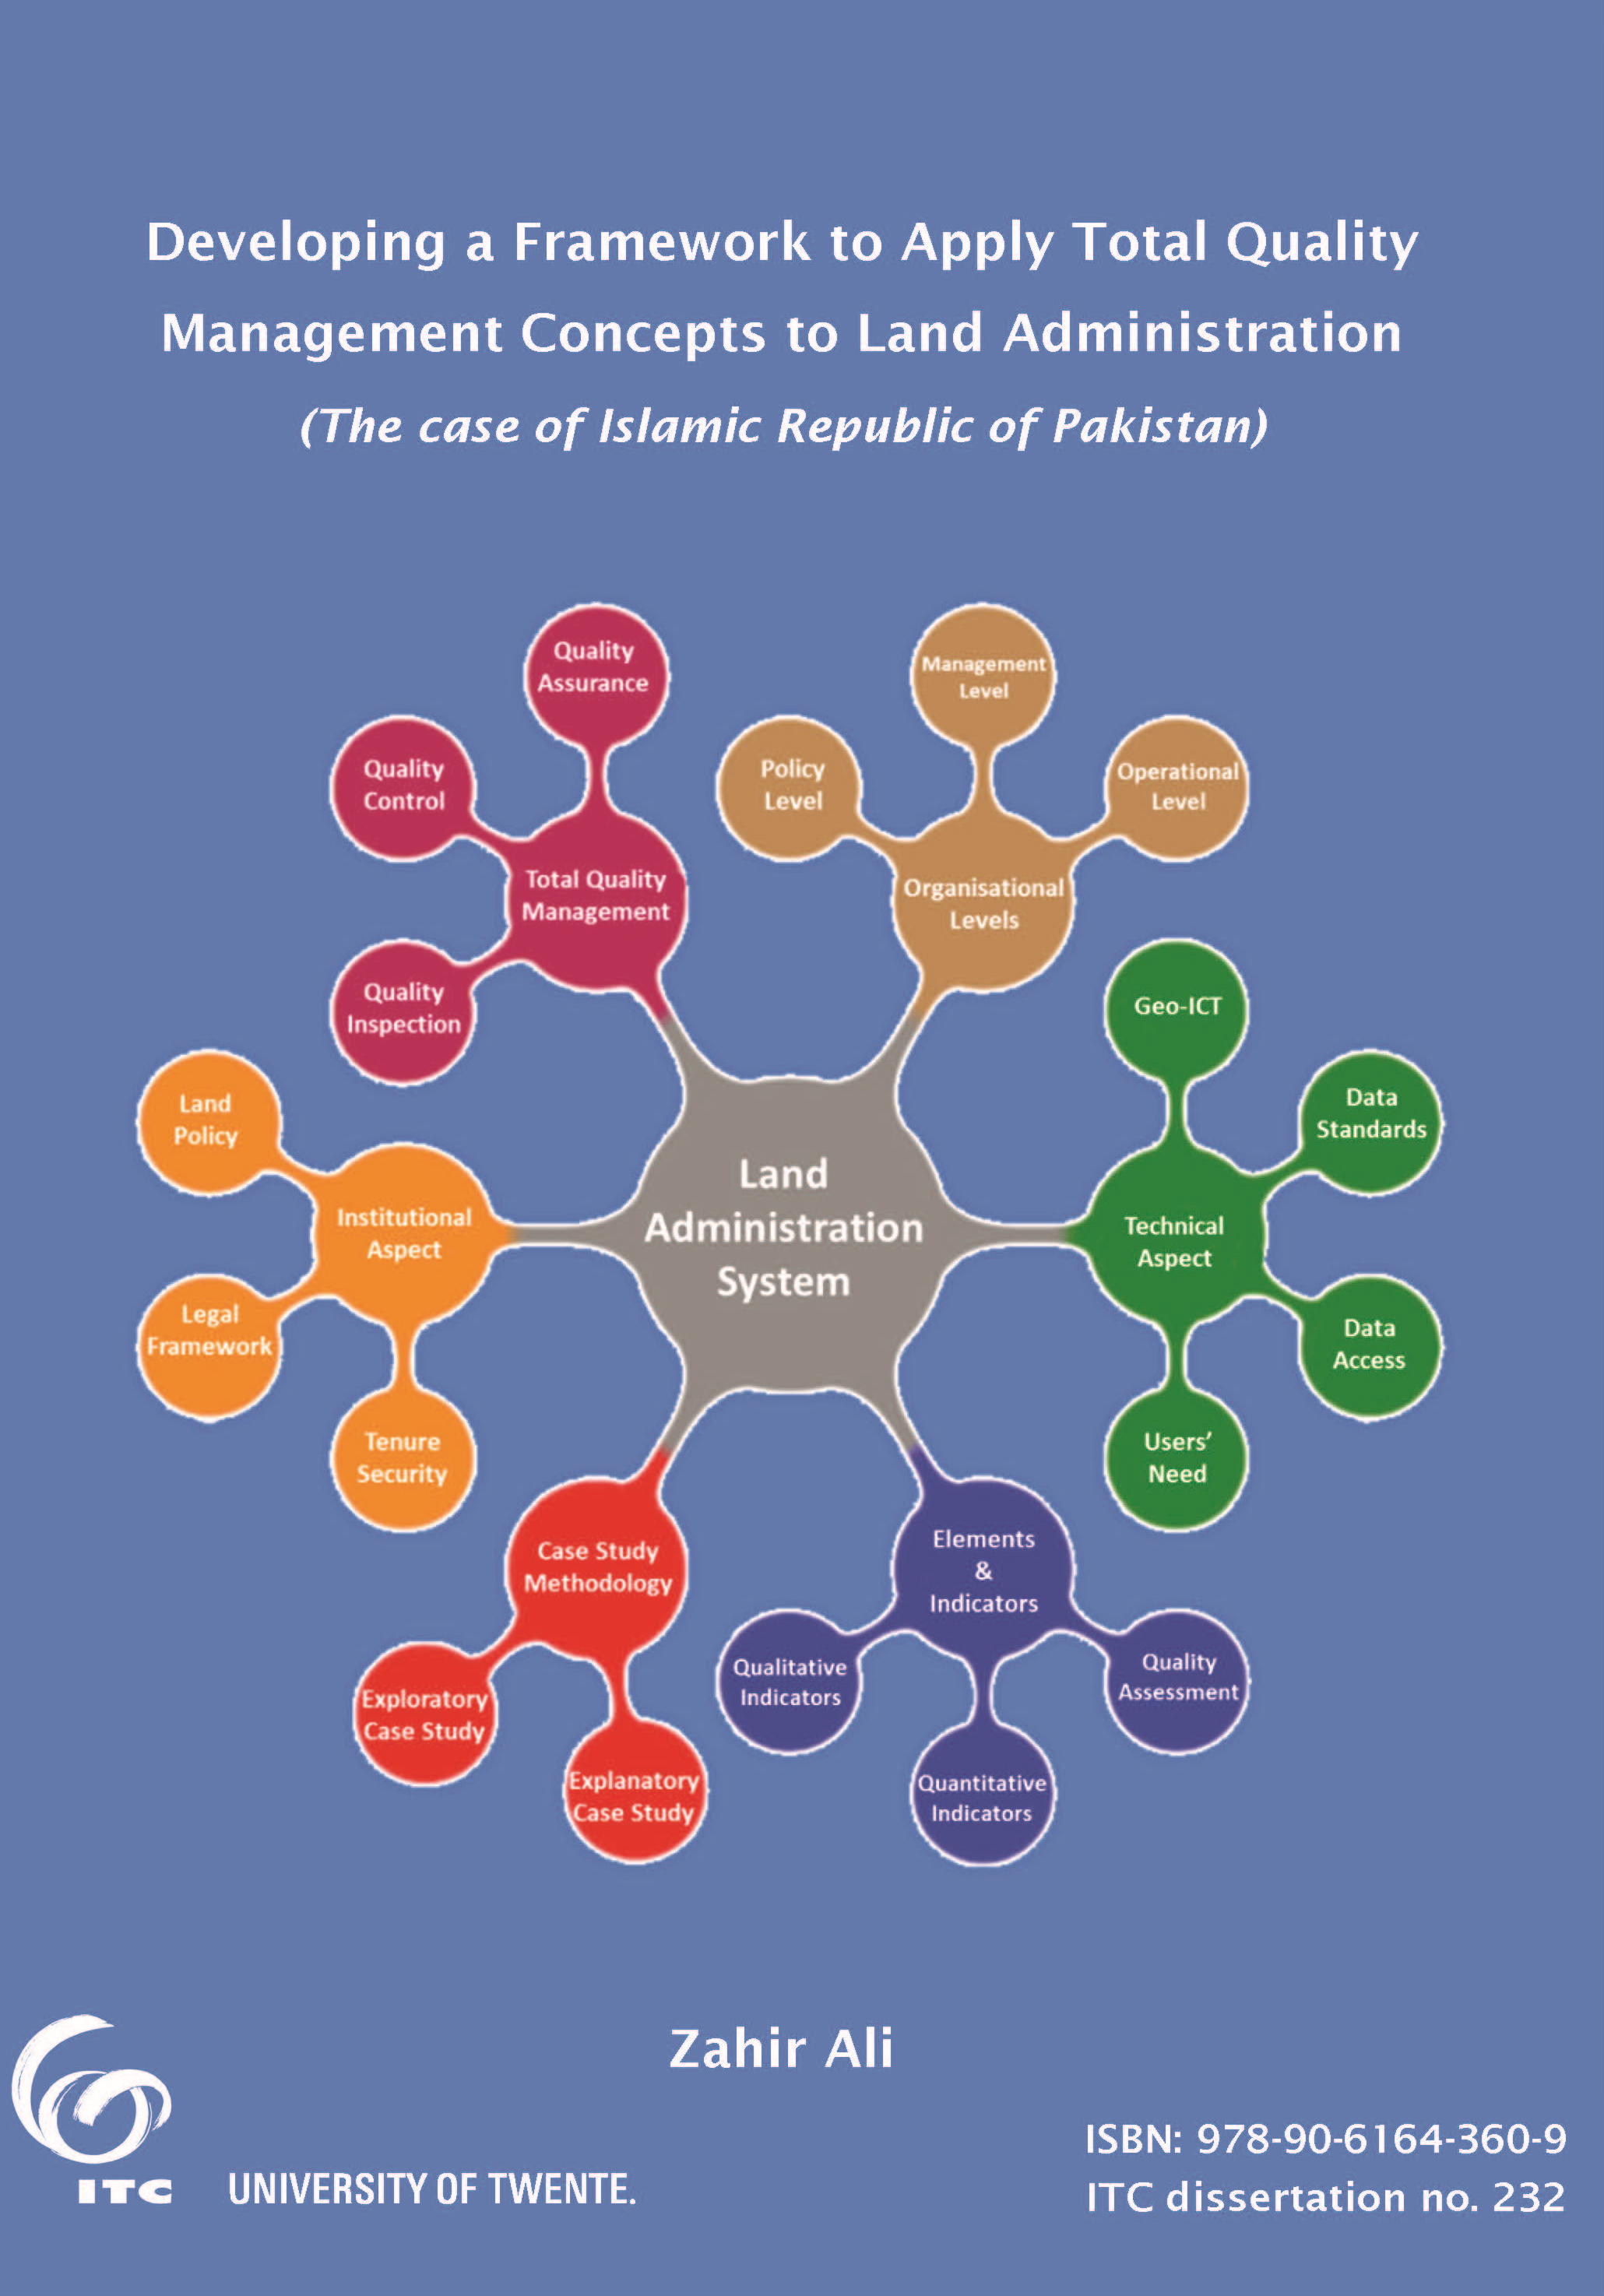 Developing a framework to apply Total Quality Management concepts to land administration: the case of Islamic Republic of Pakistan